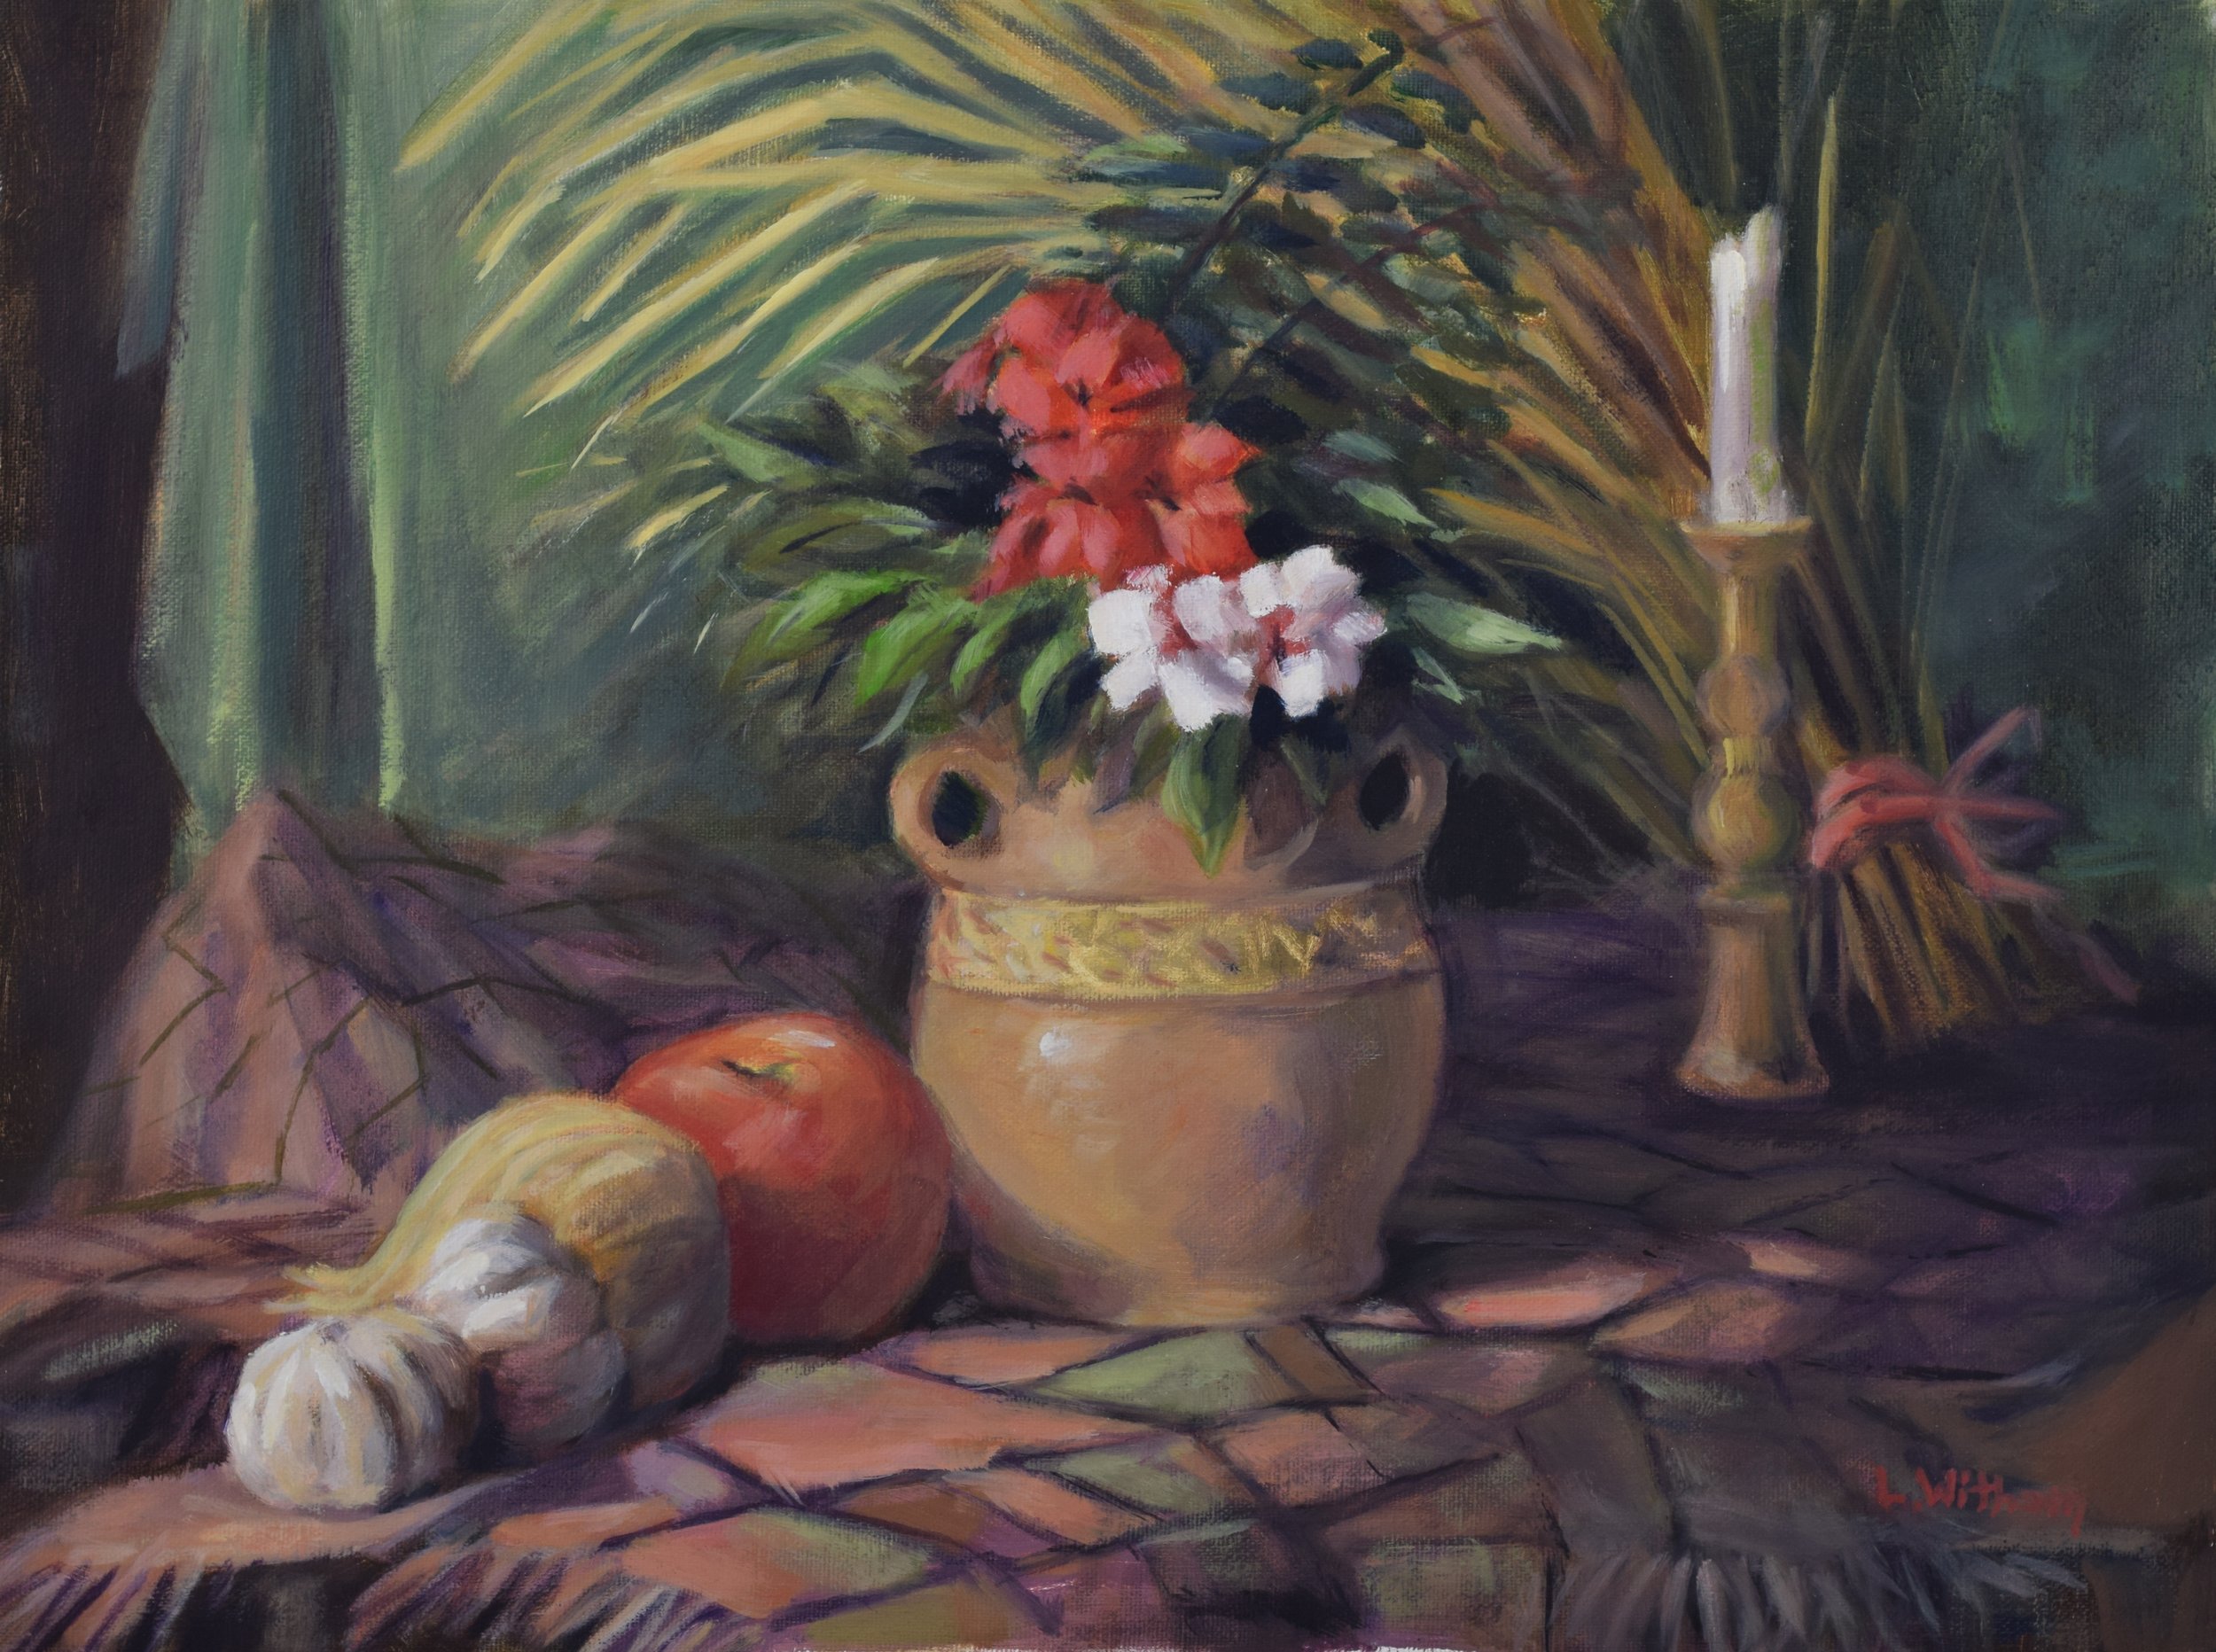 Candle with Garlic, Oil on canvas, 12x16